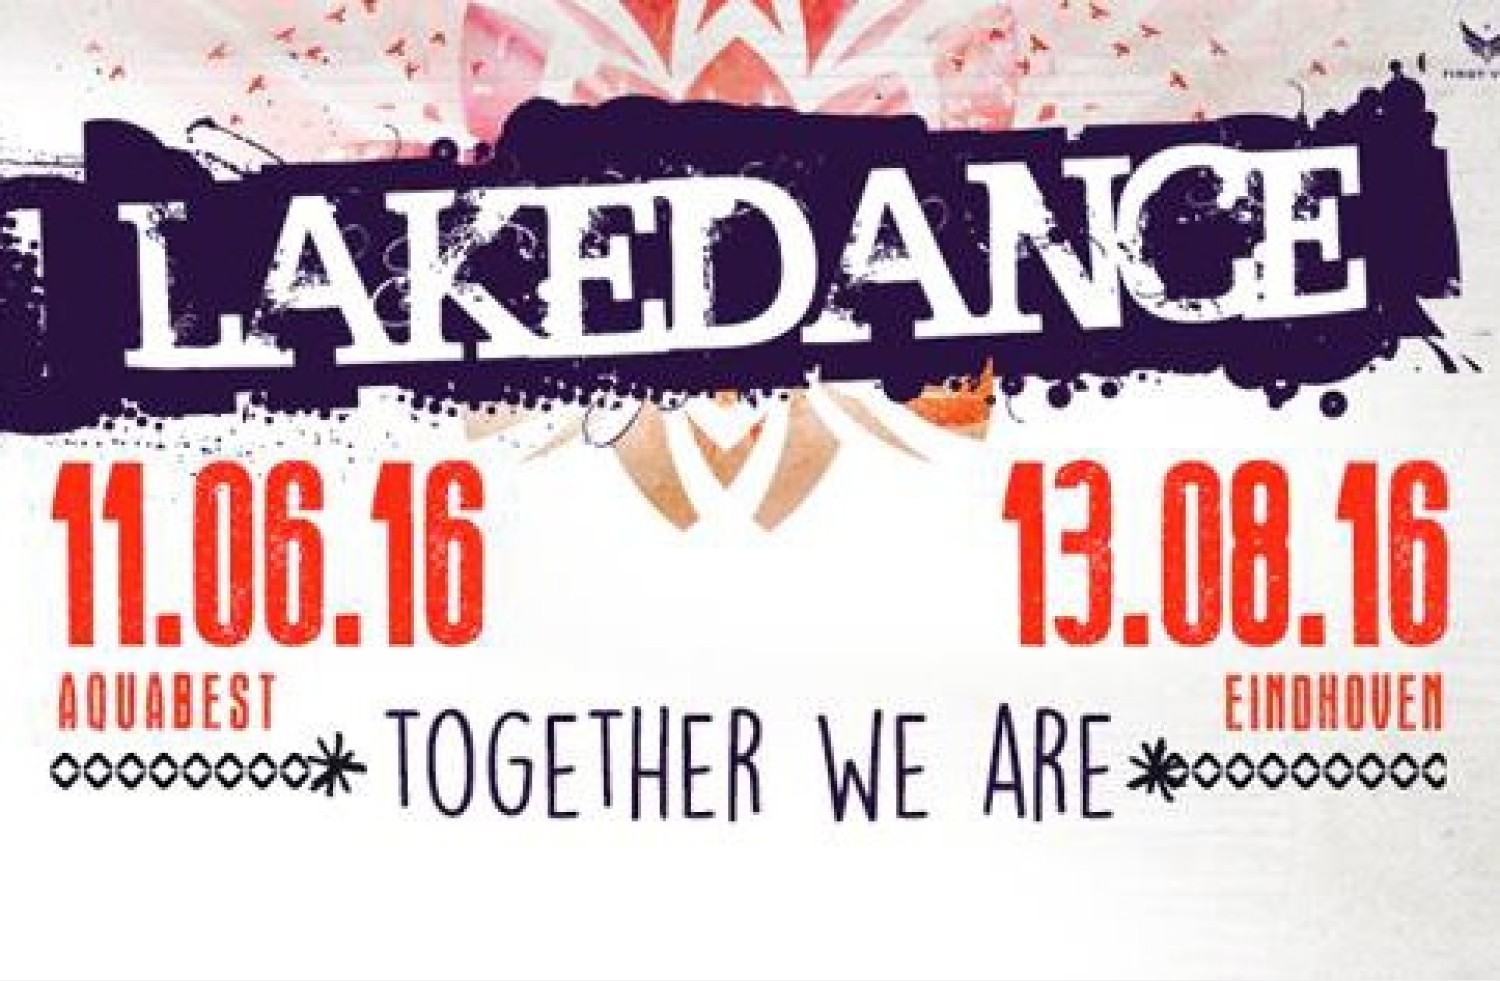 Party report: Lakedance, Best (11-06-2016)